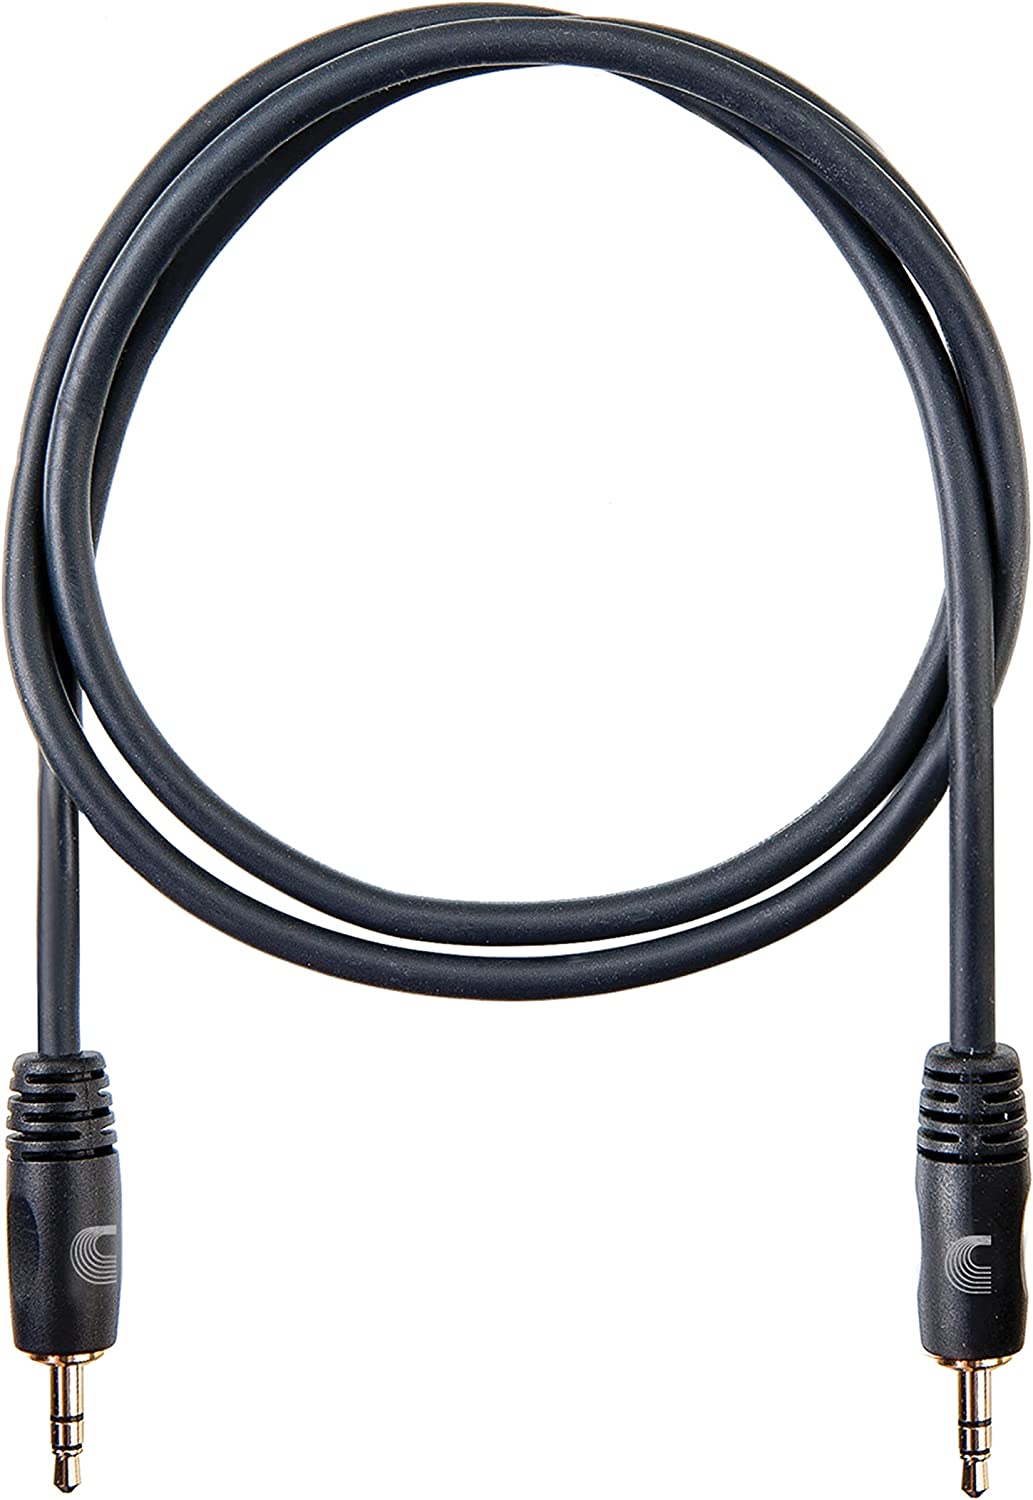 Planet Waves 1/8 Inch to 1/8 Inch Stereo Cable, 3 feet